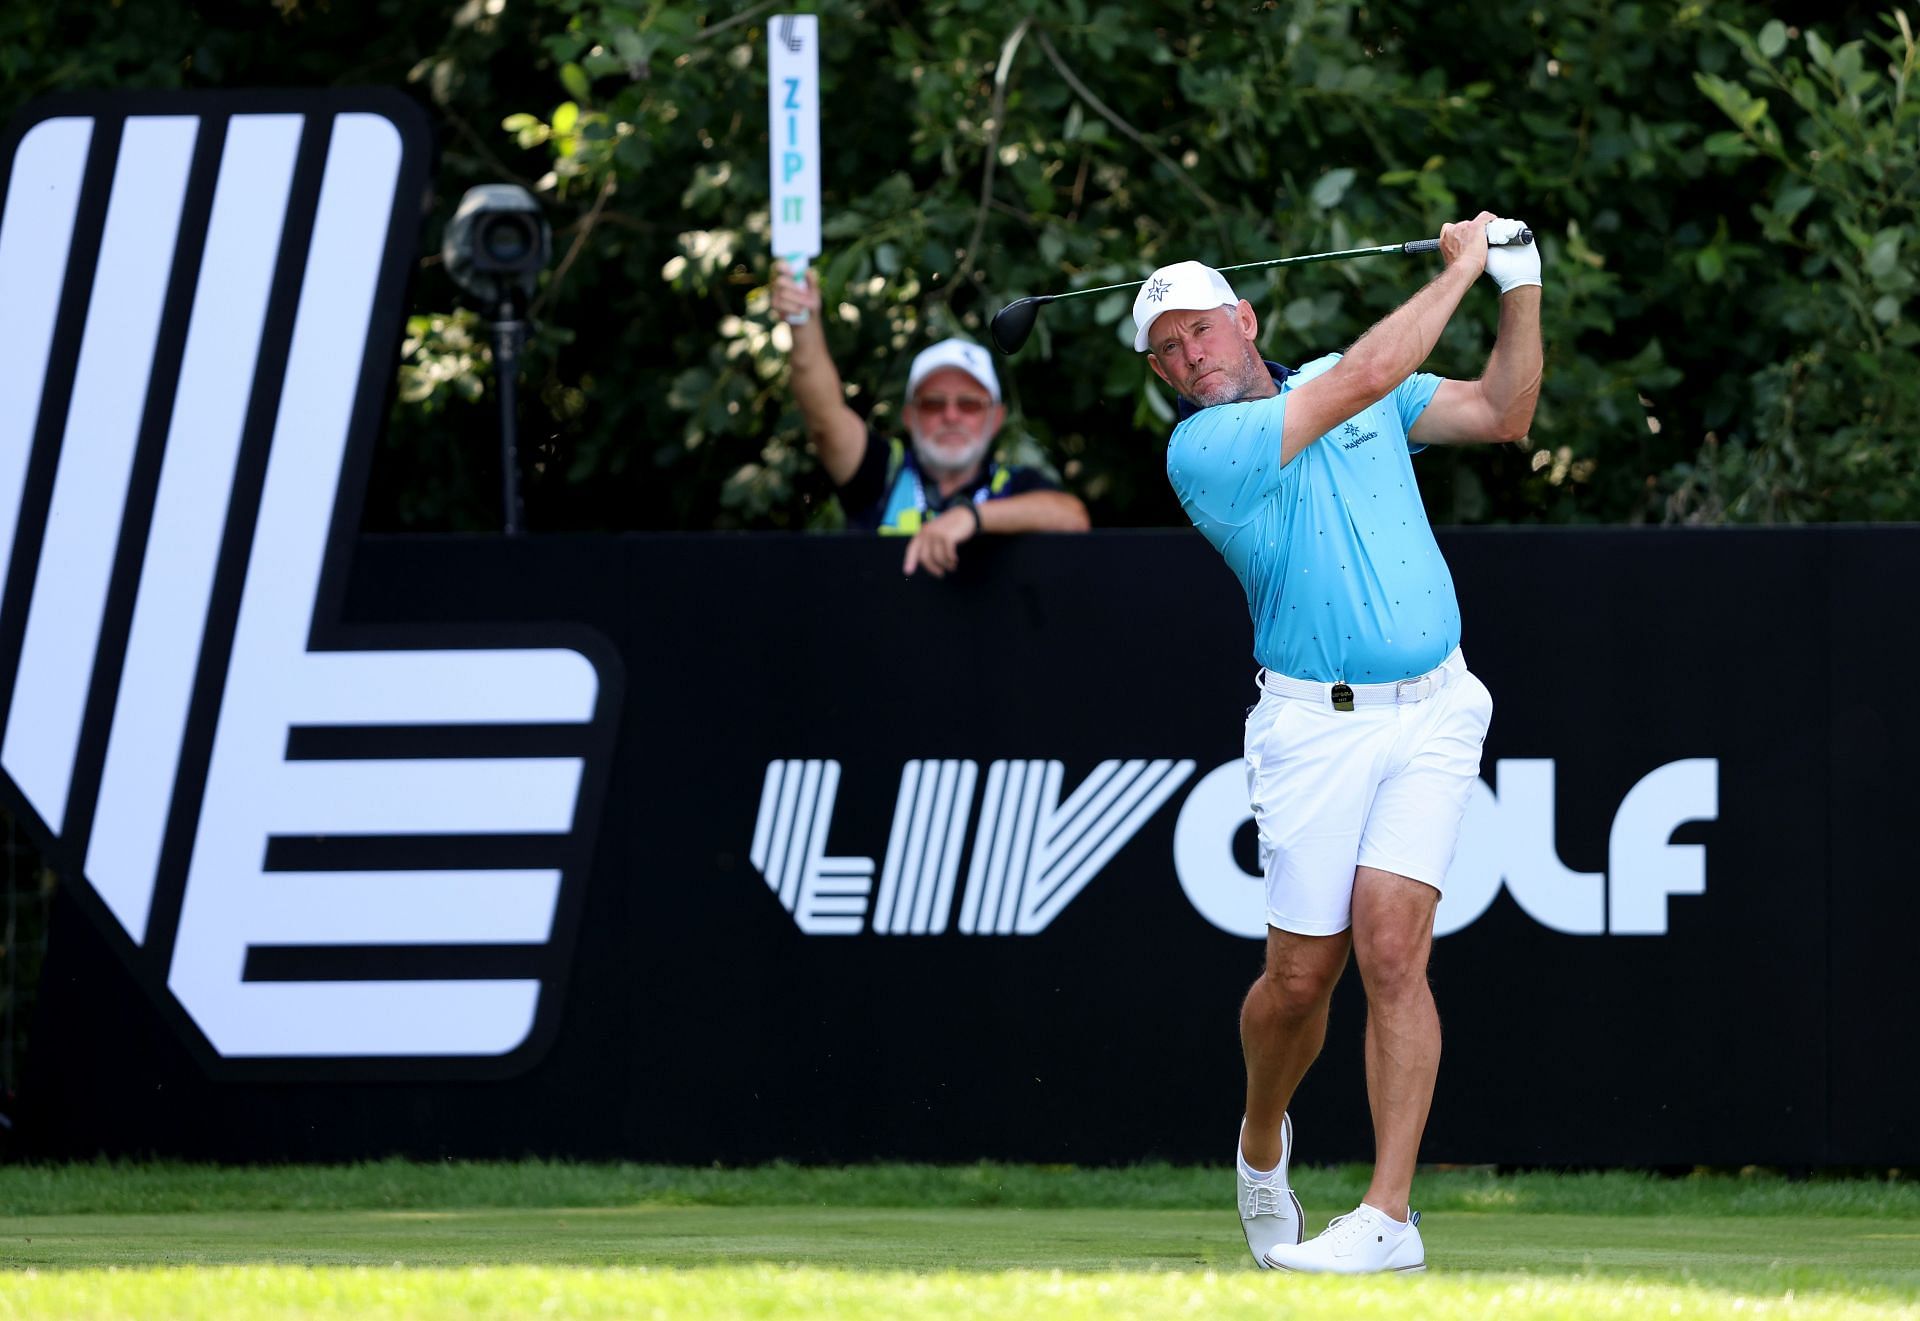 Lee Westwood at the LIV Golf (Image via Getty)